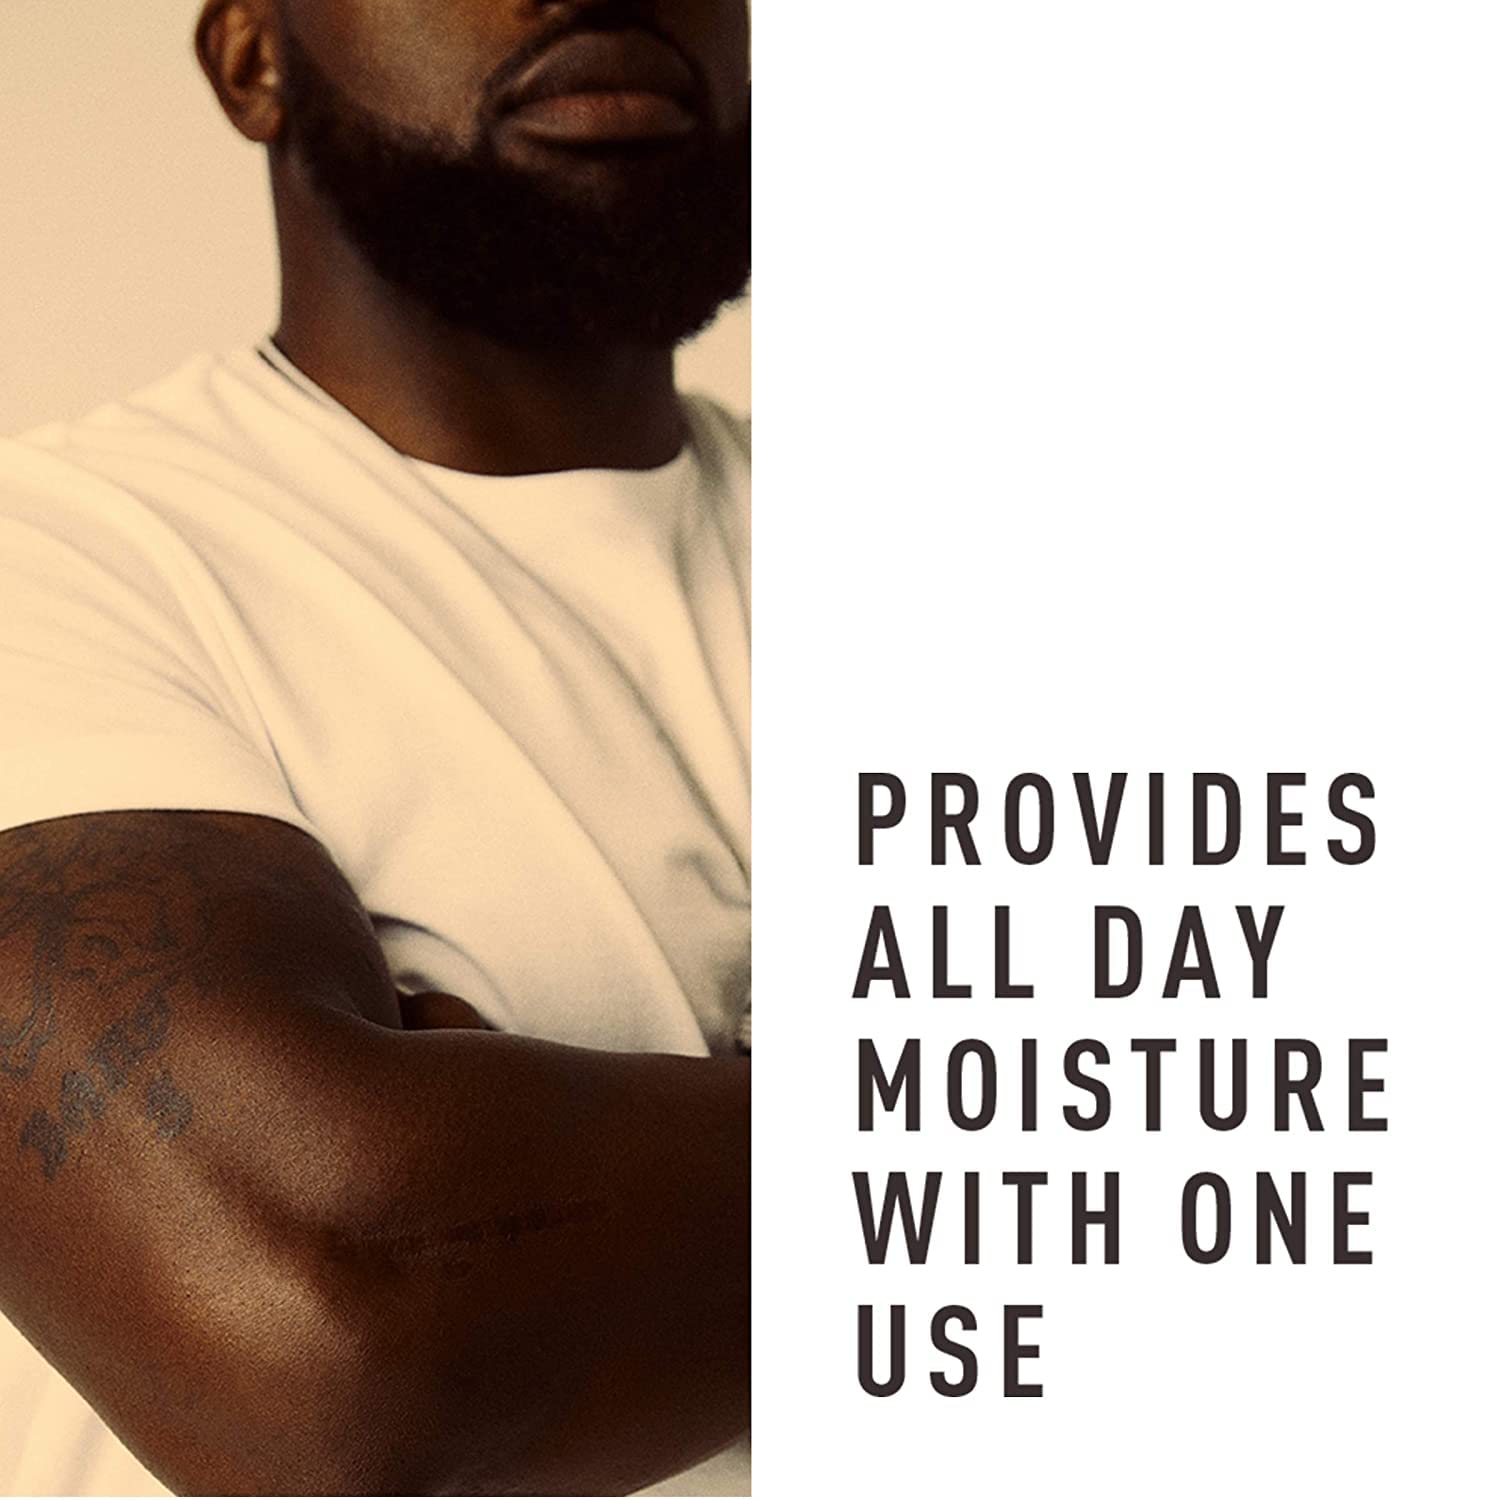 Bevel All Day Body Lotion for Men with Shea Butter and Argan Oil, Lightweight Formula Softens and Smoothes Skin, 16 Oz